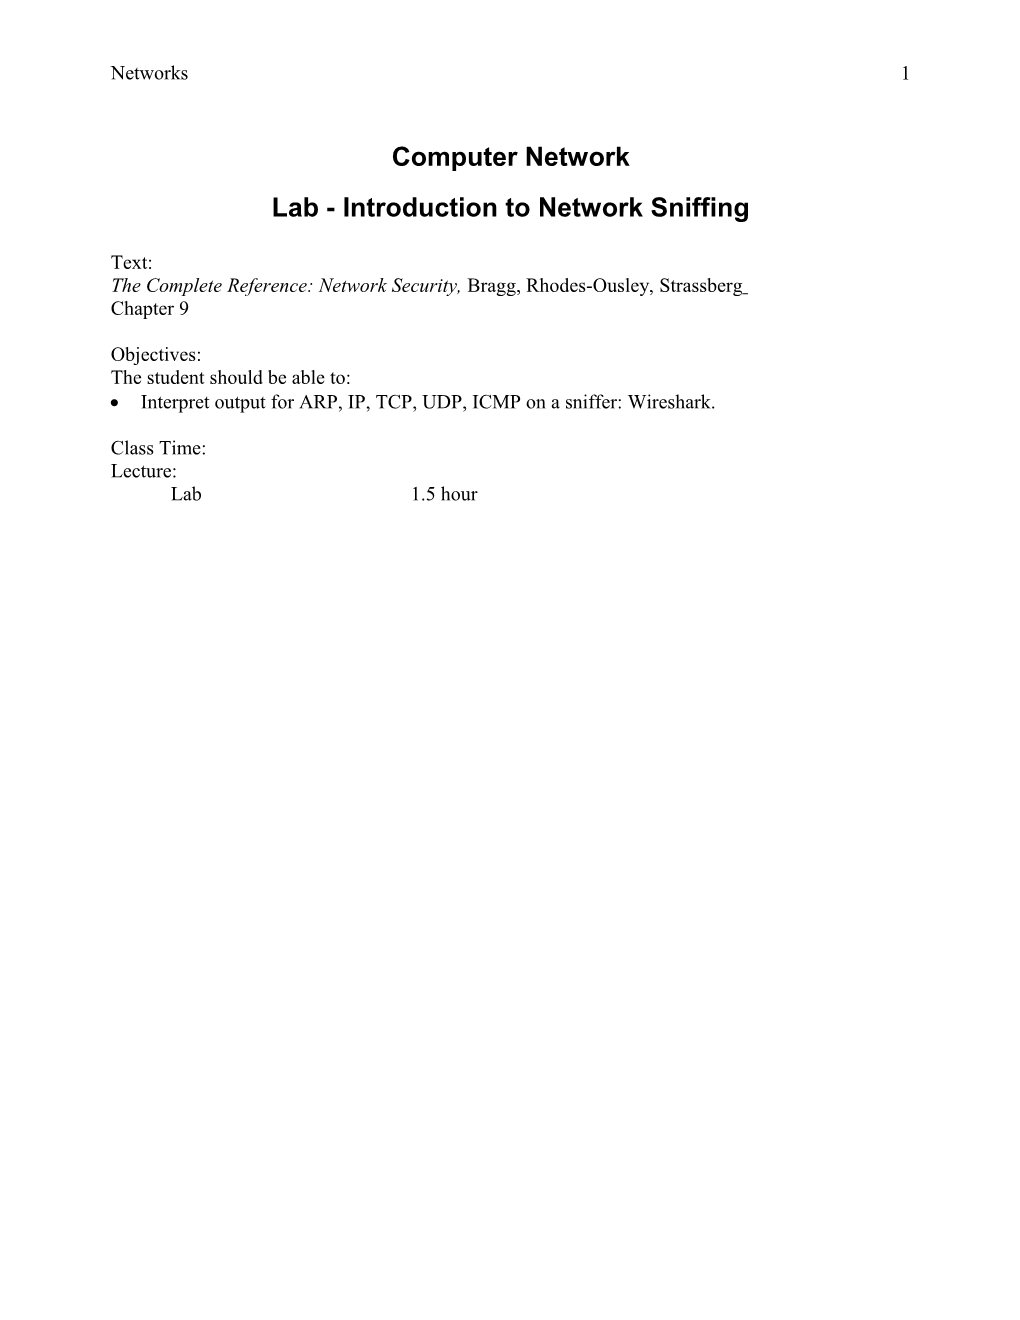 Lab - Introduction to Network Sniffing